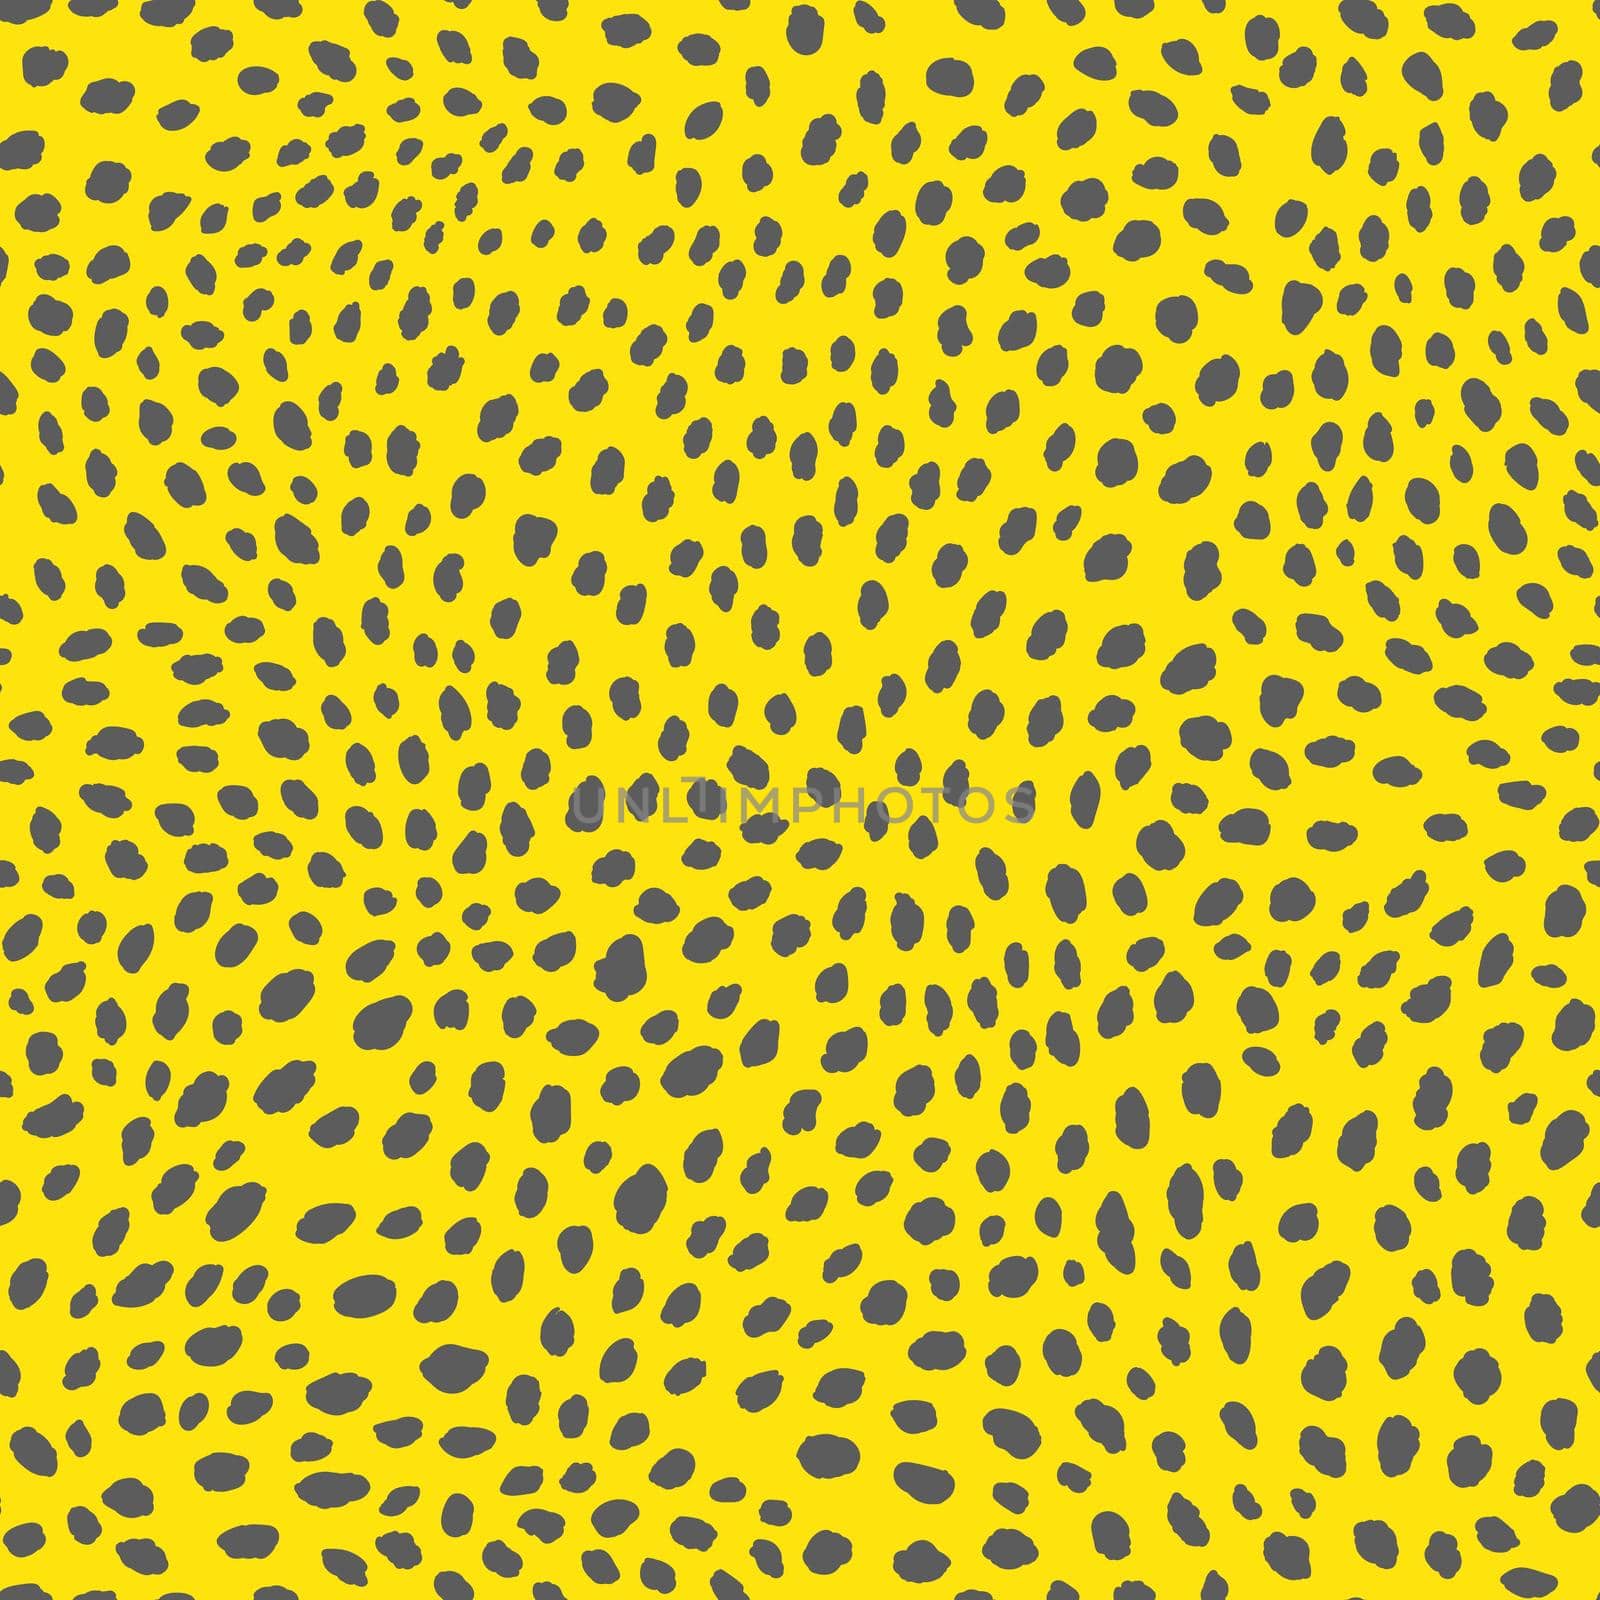 Abstract modern leopard seamless pattern. Animals trendy background. Yellow and grey decorative vector stock illustration for print, card, postcard, fabric, textile. Modern ornament of stylized skin by allaku